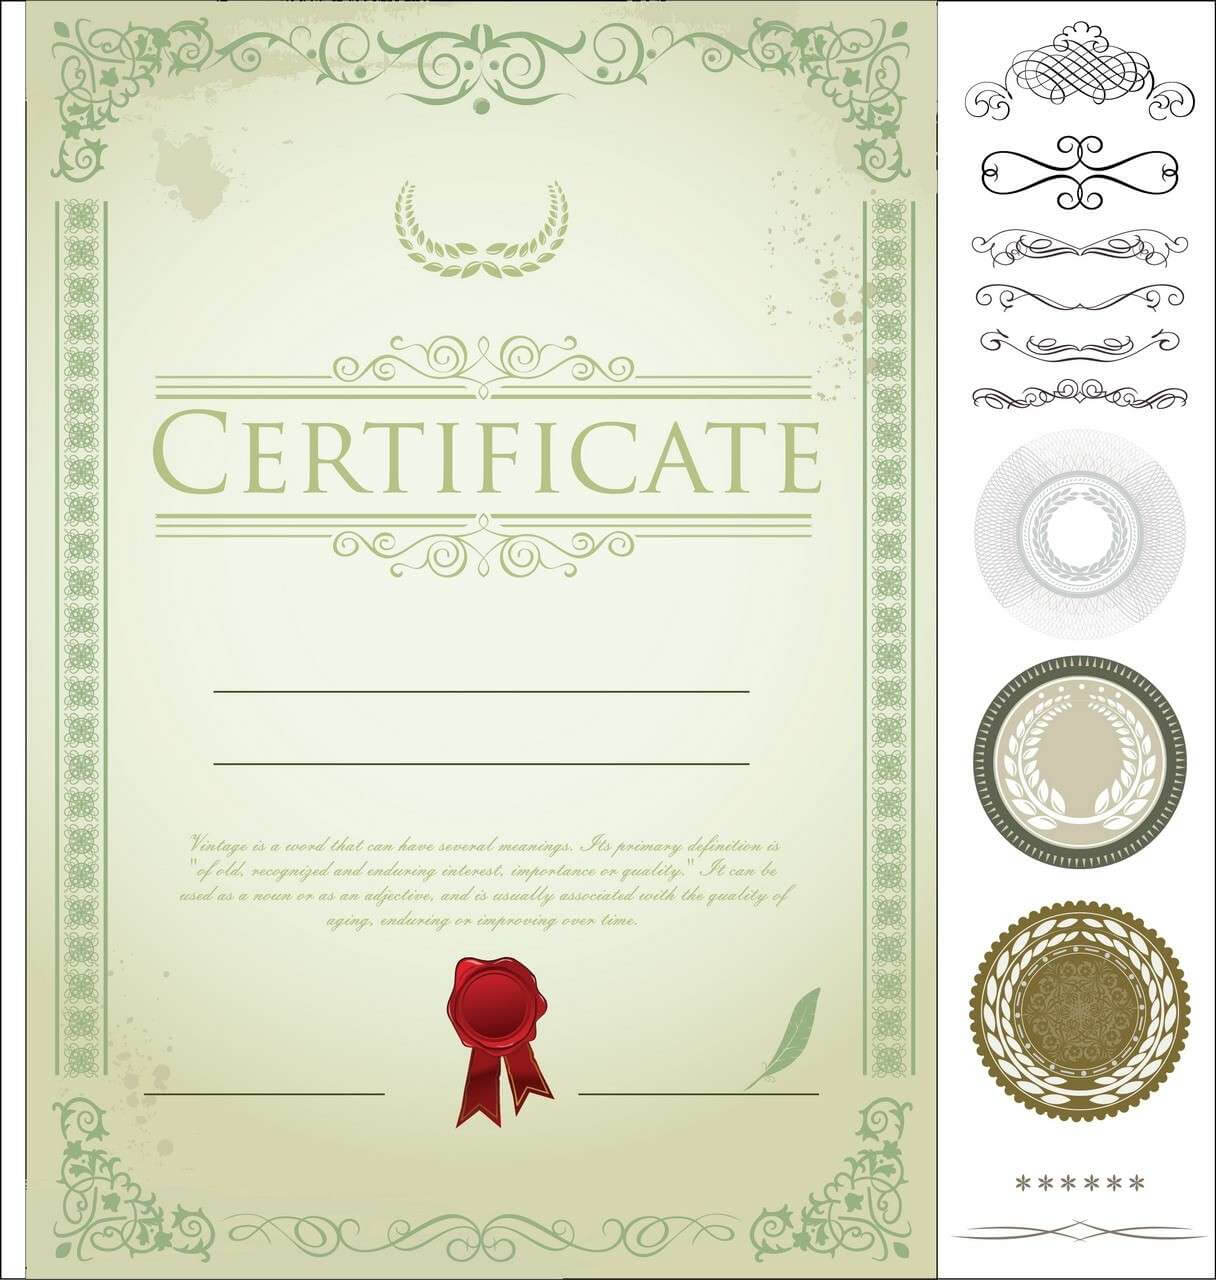 100+ [ Certificate Psd Template Free ] | Marathi Birthday Regarding This Entitles The Bearer To Template Certificate